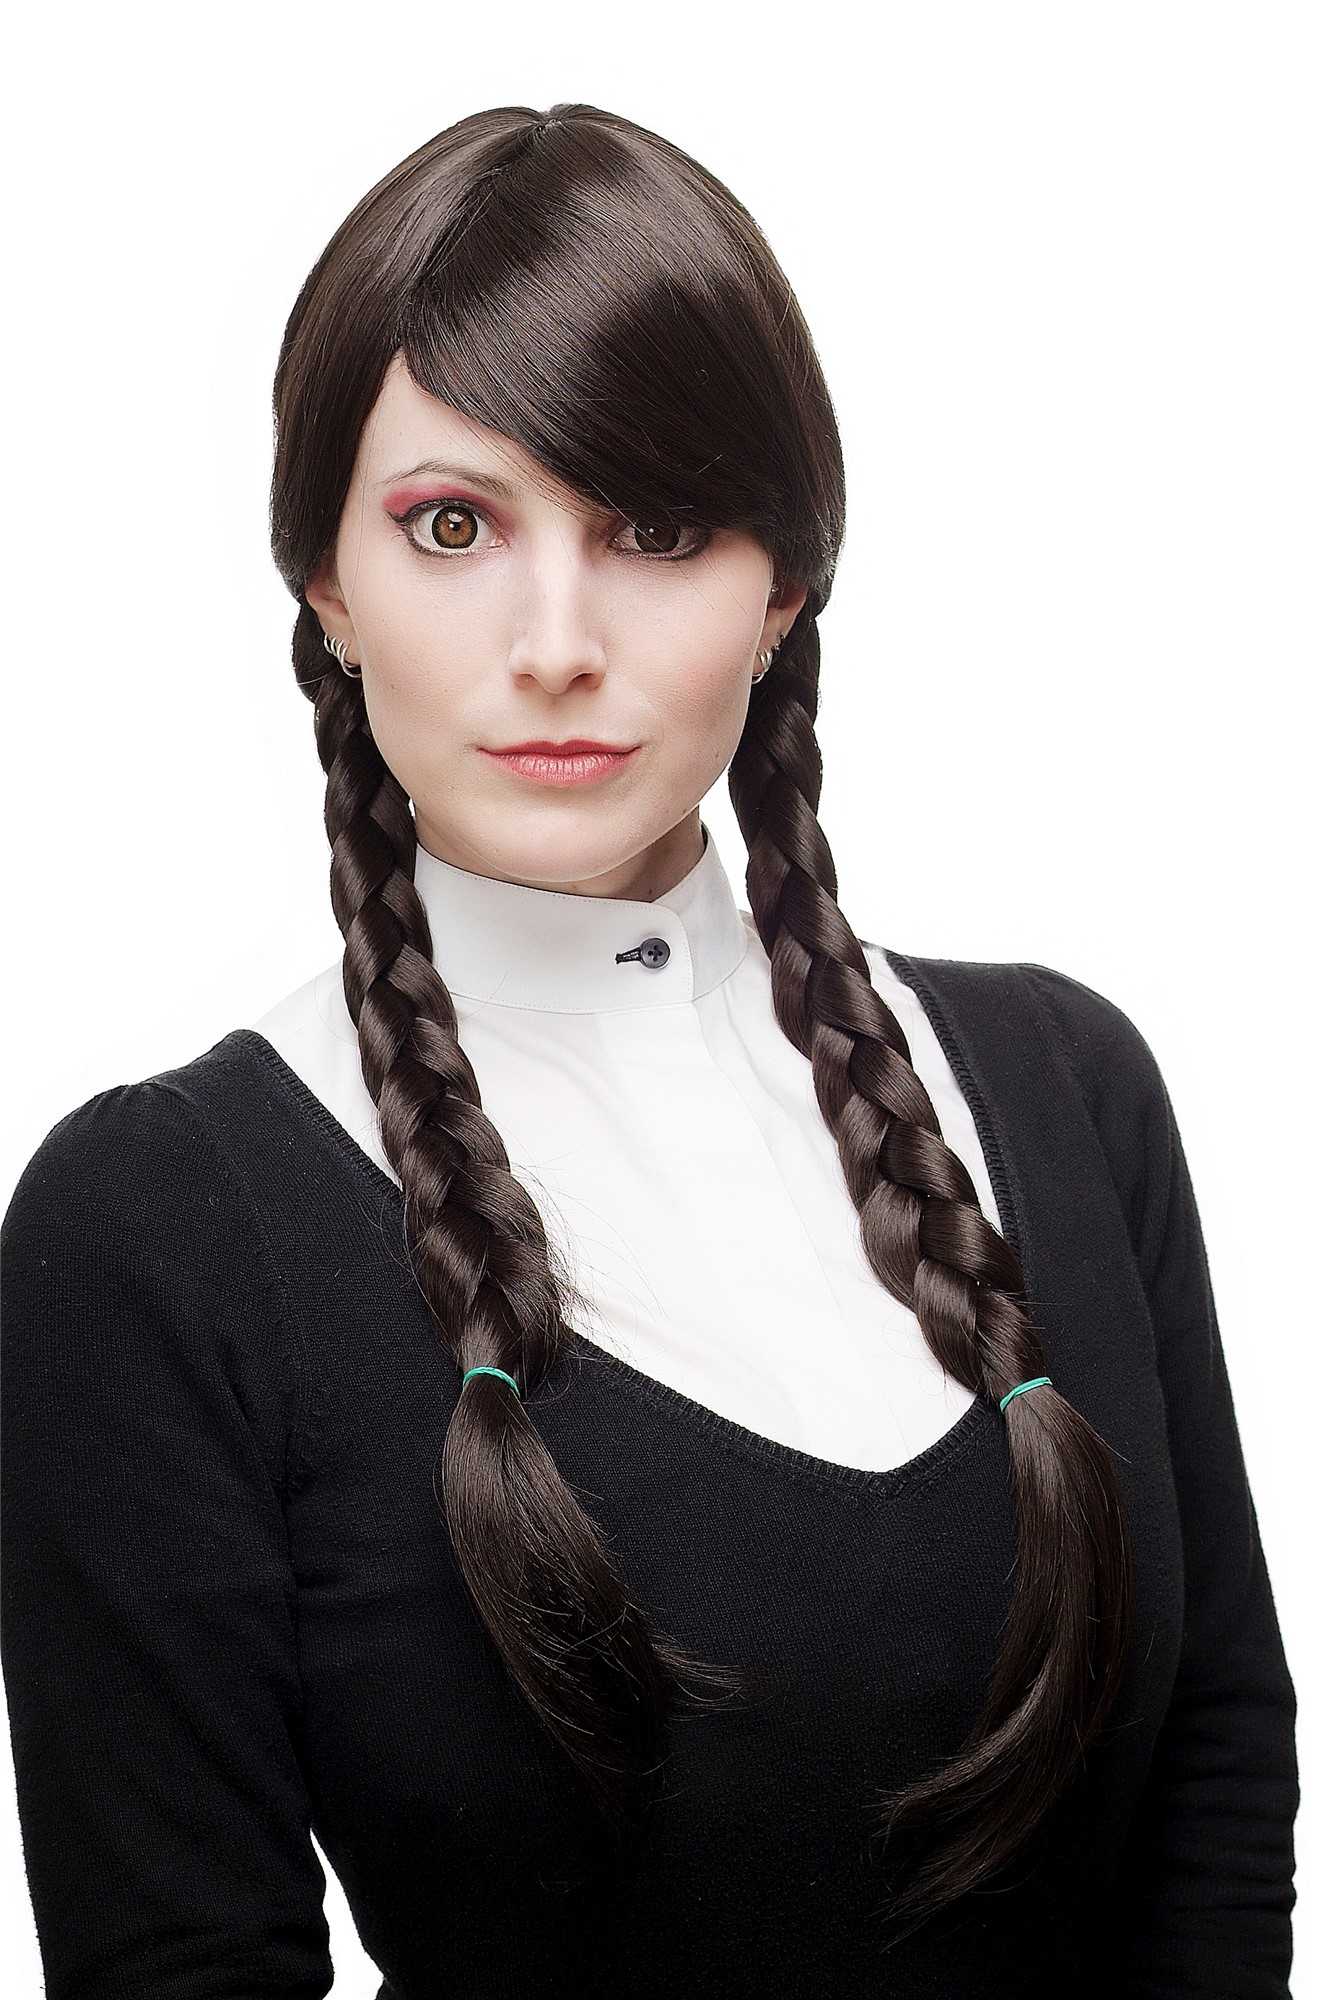 Pigtails With a Side Part Hairstyle